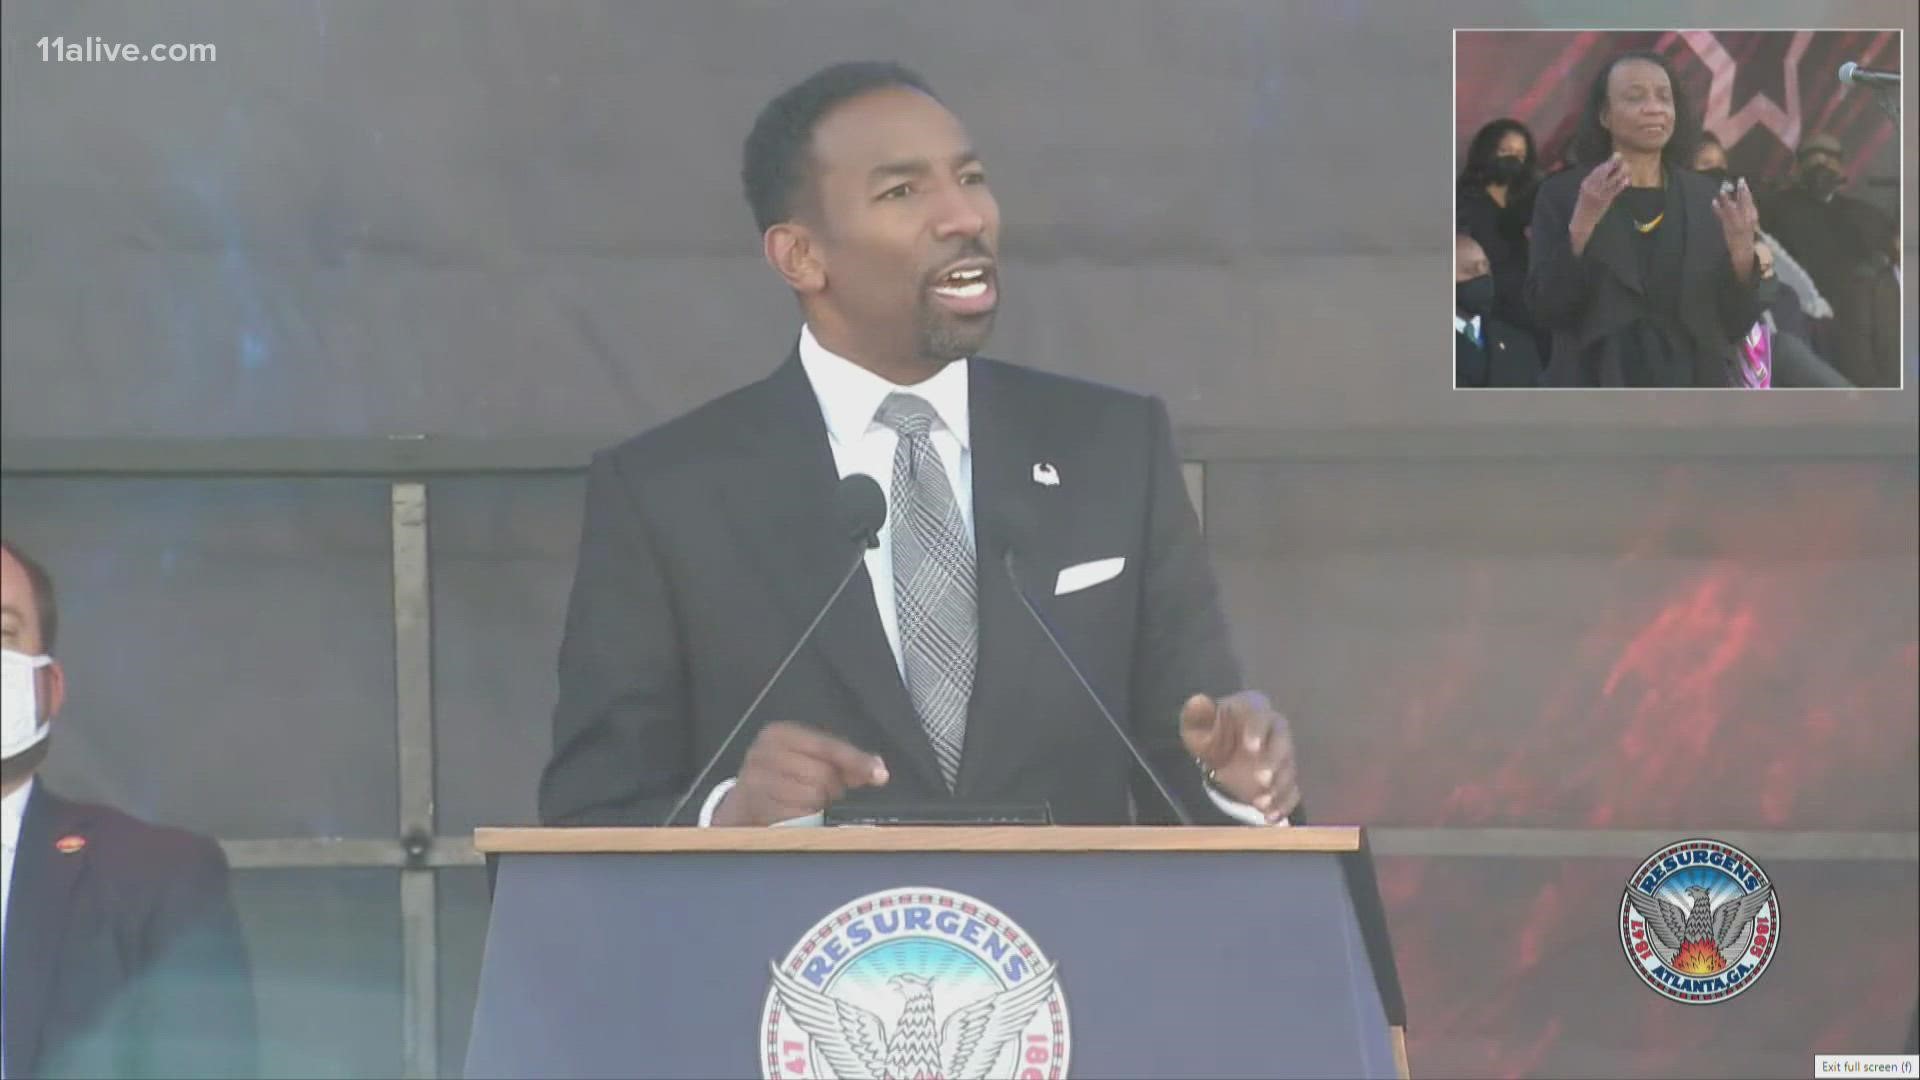 He talked about future plans he would like to see for the city during his inauguration ceremony for mayor.